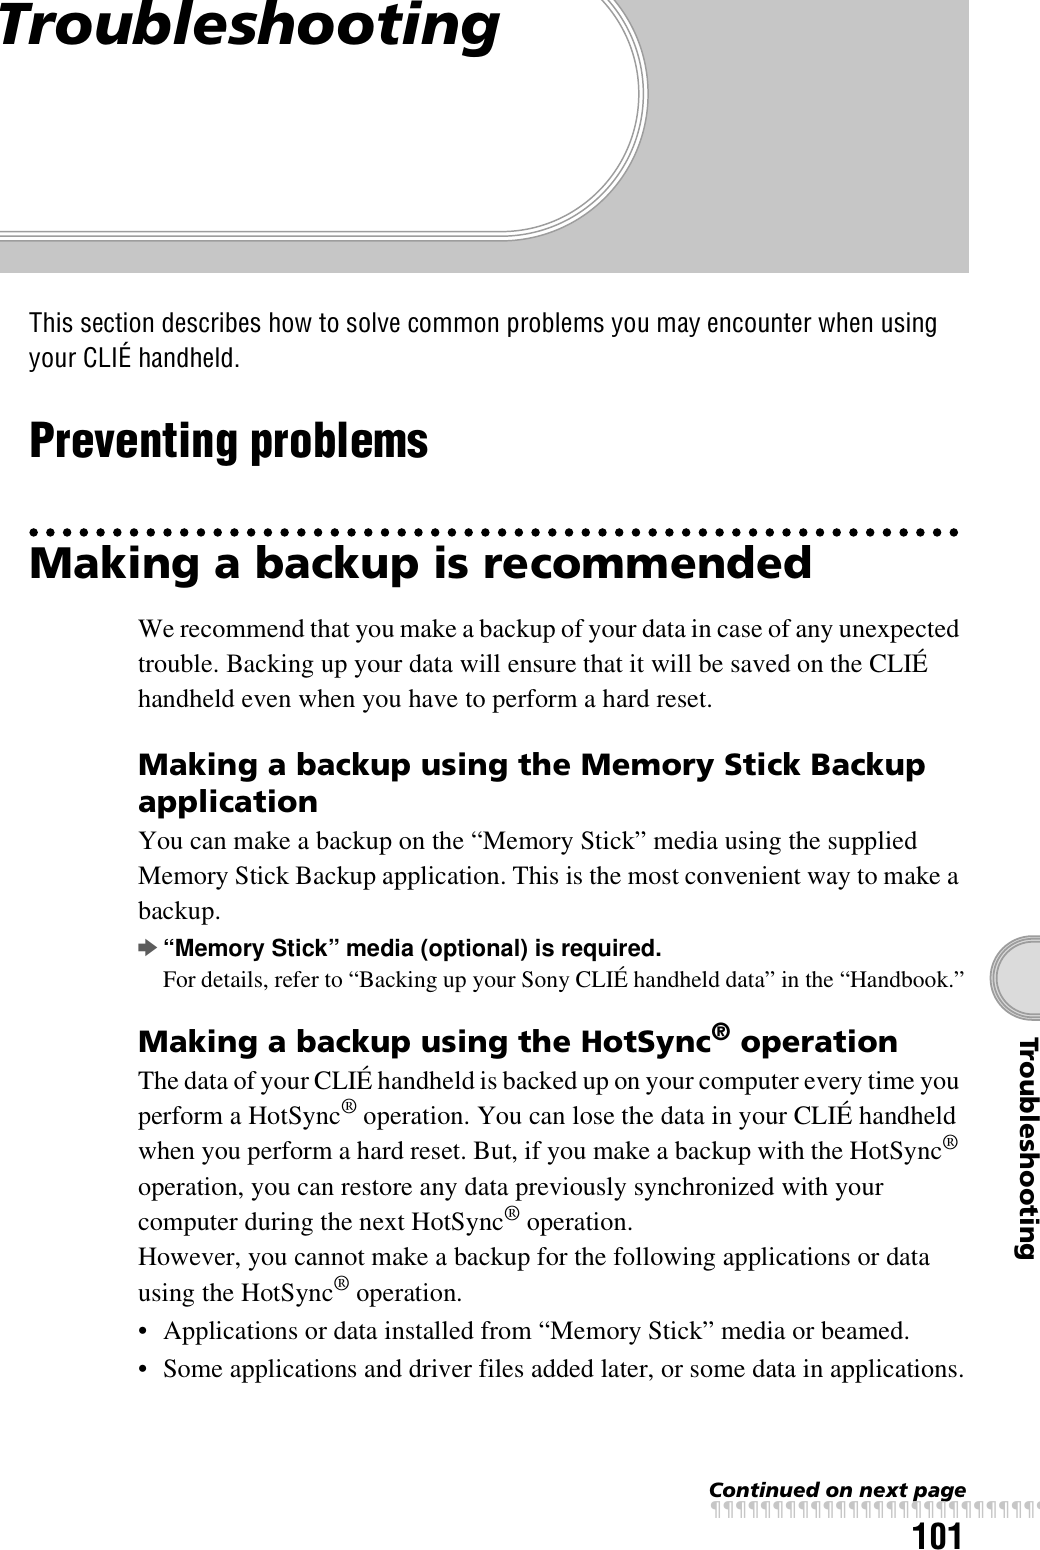 101TroubleshootingTroubleshootingThis section describes how to solve common problems you may encounter when using your CLIÉ handheld.Preventing problemsMaking a backup is recommendedWe recommend that you make a backup of your data in case of any unexpected trouble. Backing up your data will ensure that it will be saved on the CLIÉ handheld even when you have to perform a hard reset.Making a backup using the Memory Stick Backup applicationYou can make a backup on the “Memory Stick” media using the supplied Memory Stick Backup application. This is the most convenient way to make a backup.b“Memory Stick” media (optional) is required.For details, refer to “Backing up your Sony CLIÉ handheld data” in the “Handbook.”Making a backup using the HotSync® operationThe data of your CLIÉ handheld is backed up on your computer every time you perform a HotSync® operation. You can lose the data in your CLIÉ handheld when you perform a hard reset. But, if you make a backup with the HotSync® operation, you can restore any data previously synchronized with your computer during the next HotSync® operation. However, you cannot make a backup for the following applications or data using the HotSync® operation.• Applications or data installed from “Memory Stick” media or beamed.• Some applications and driver files added later, or some data in applications.Continued on next pagexxxxxxxxxxxxxxxxxxxxxxxxxxx